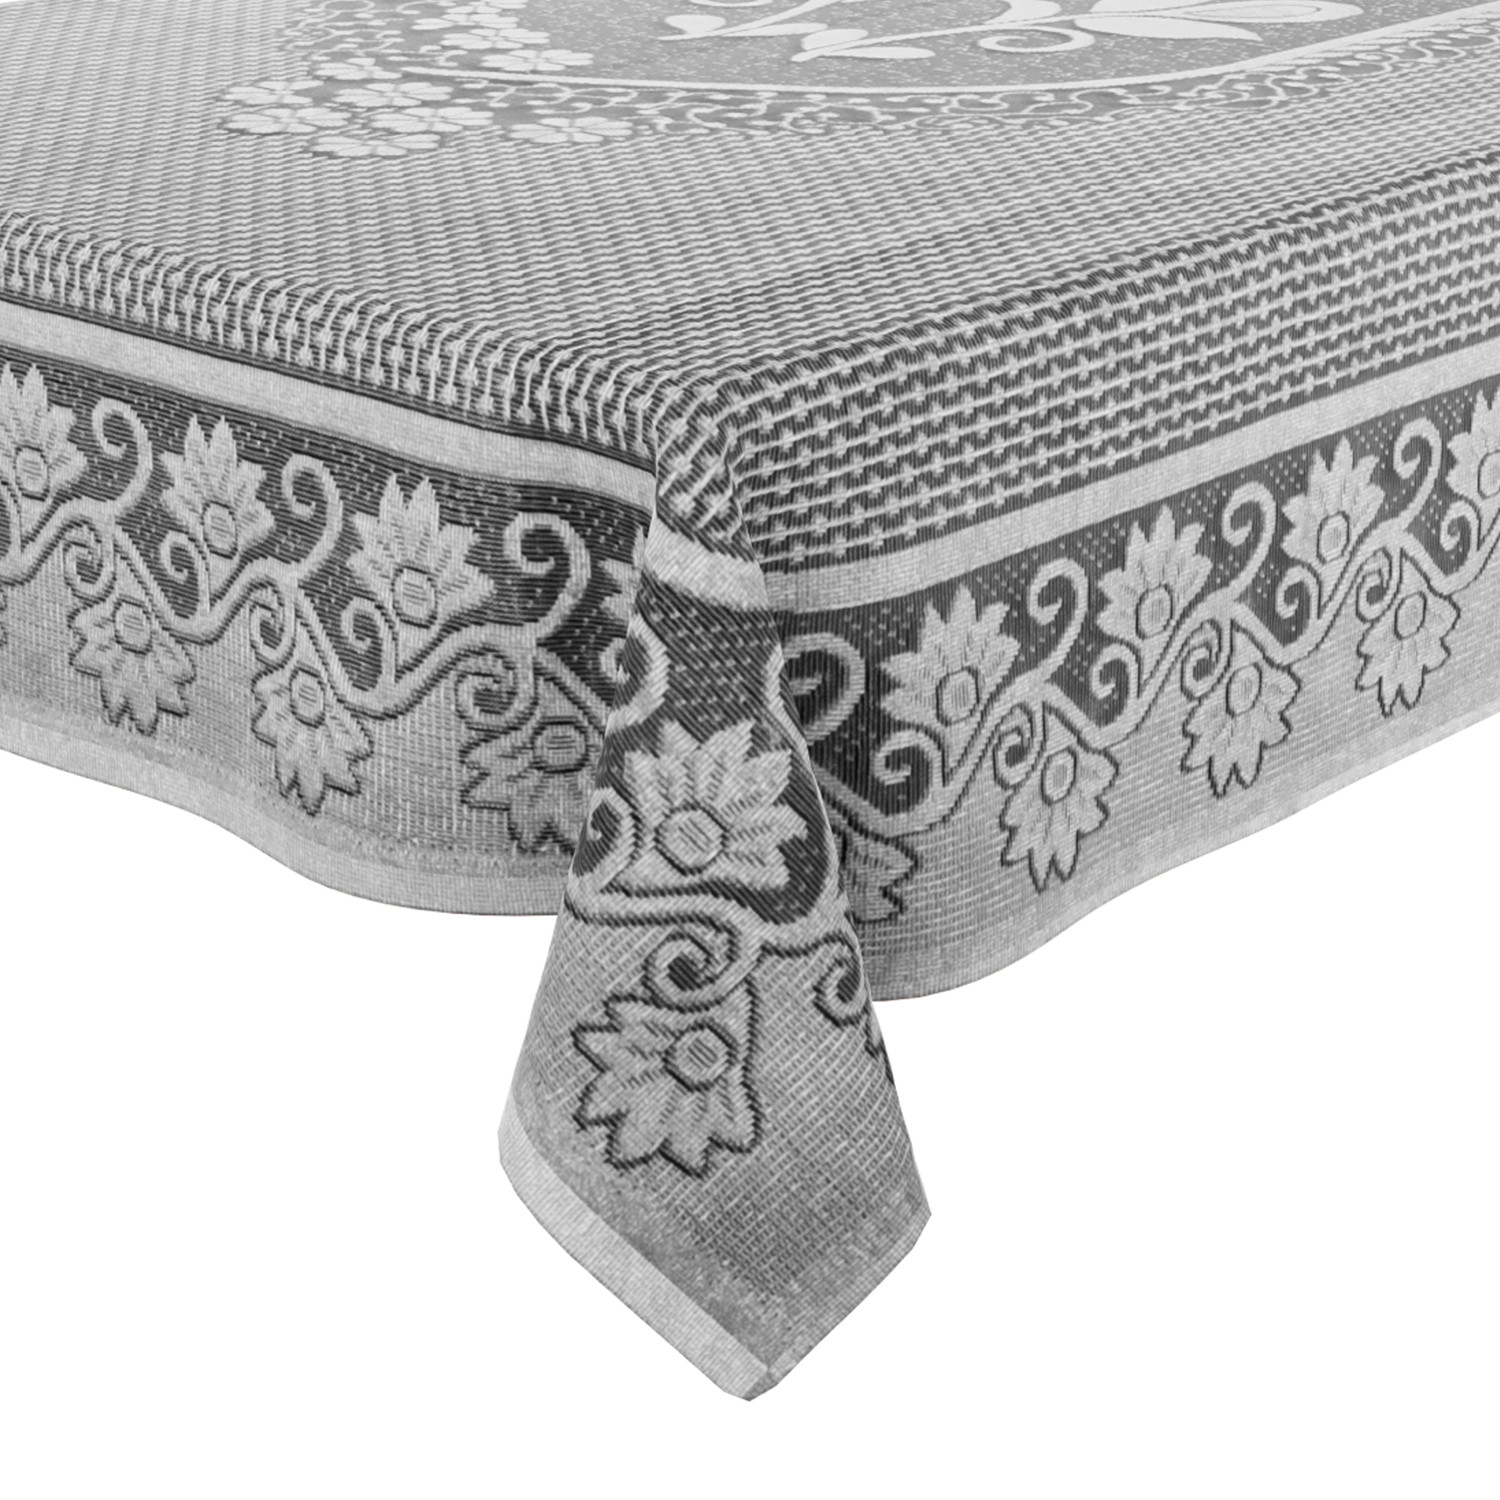 Kuber Industries Center Table Cover|Cotton Luxurious Net Floral S-19 Design|Stain-Resistant & Anti Skid Coffee Table Cover|40x60 Inch (White)